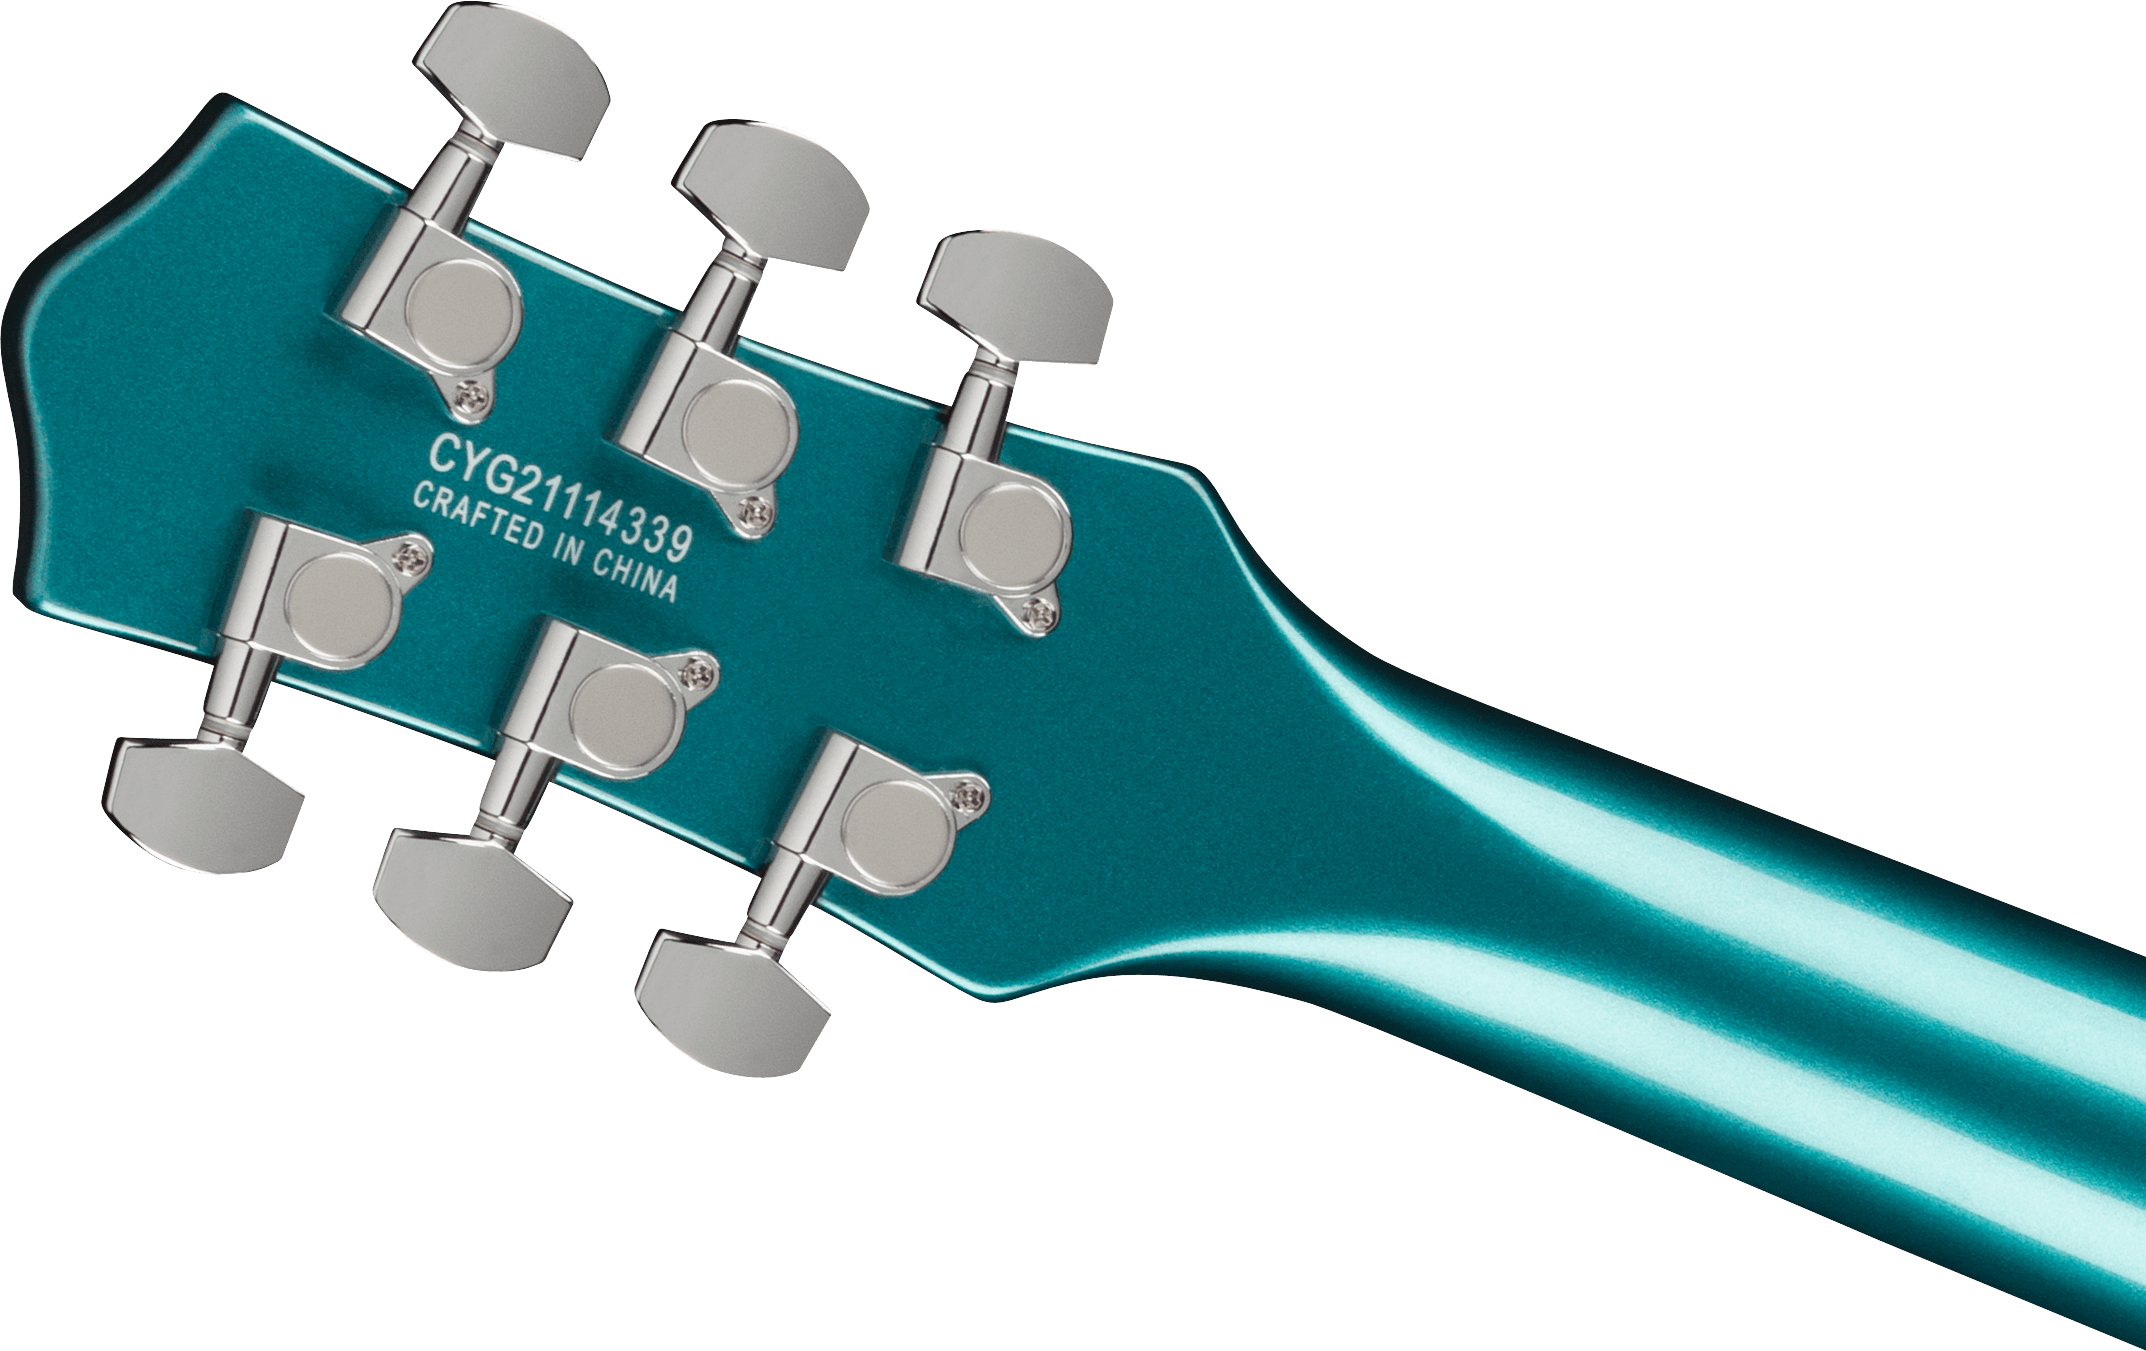 Gretsch G5222 Electromatic Double Jet Bt Electric Guitar - Ocean Turquoise